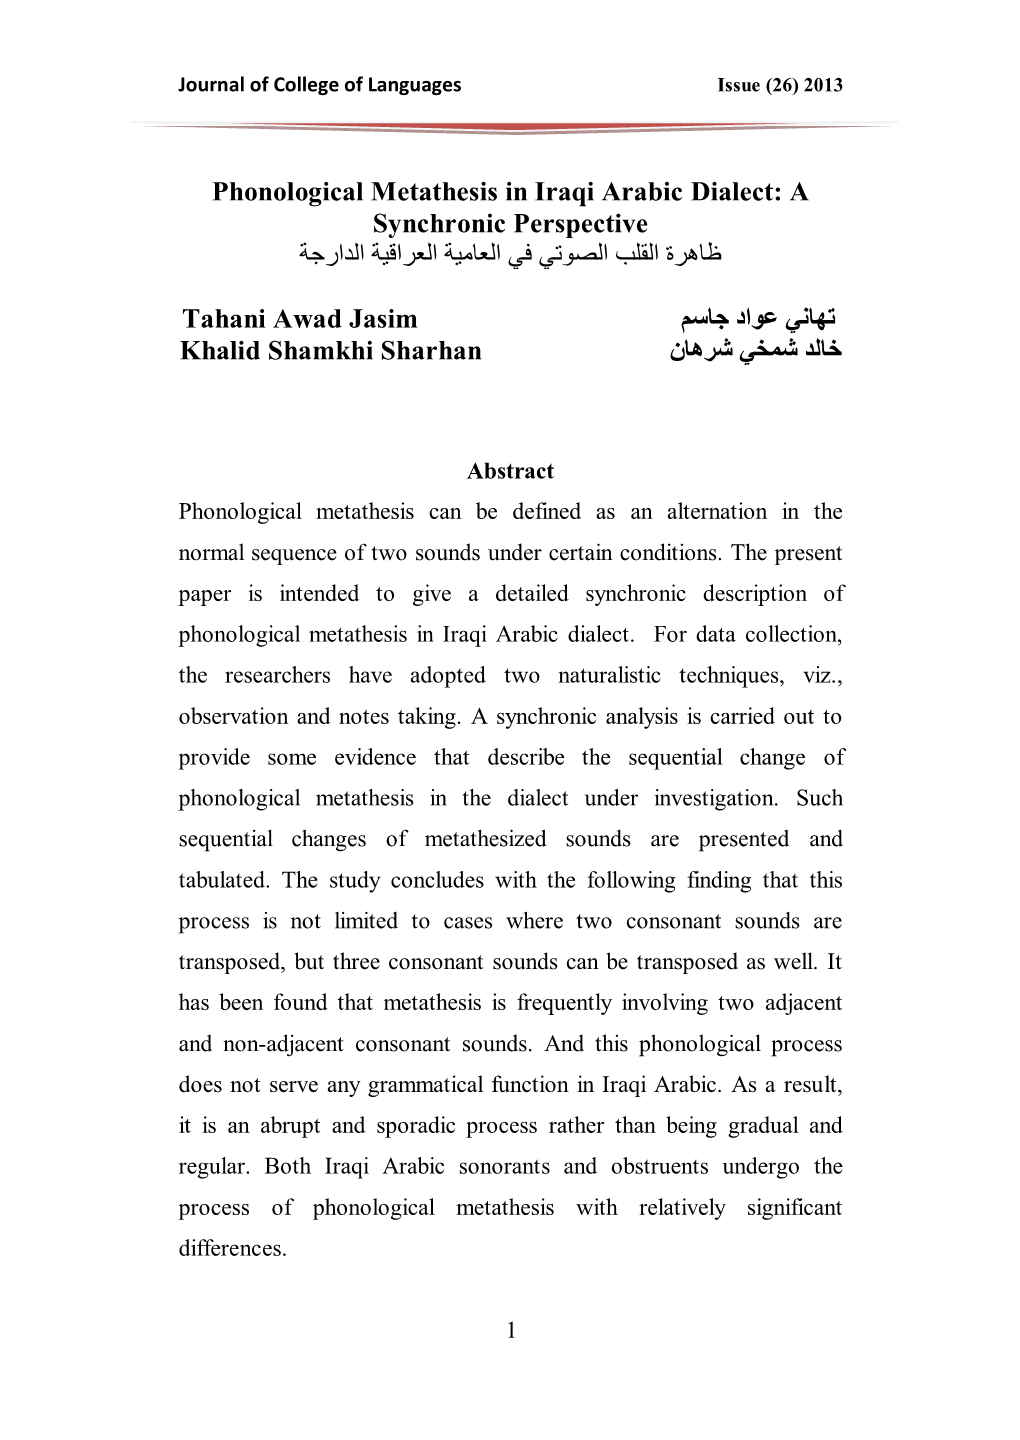 Phonological Metathesis in Iraqi Arabic Dialect: a Synchronic Perspective ظاْشة انقهب انصٕحي في انعاييت انعشاقيت انذاسجت